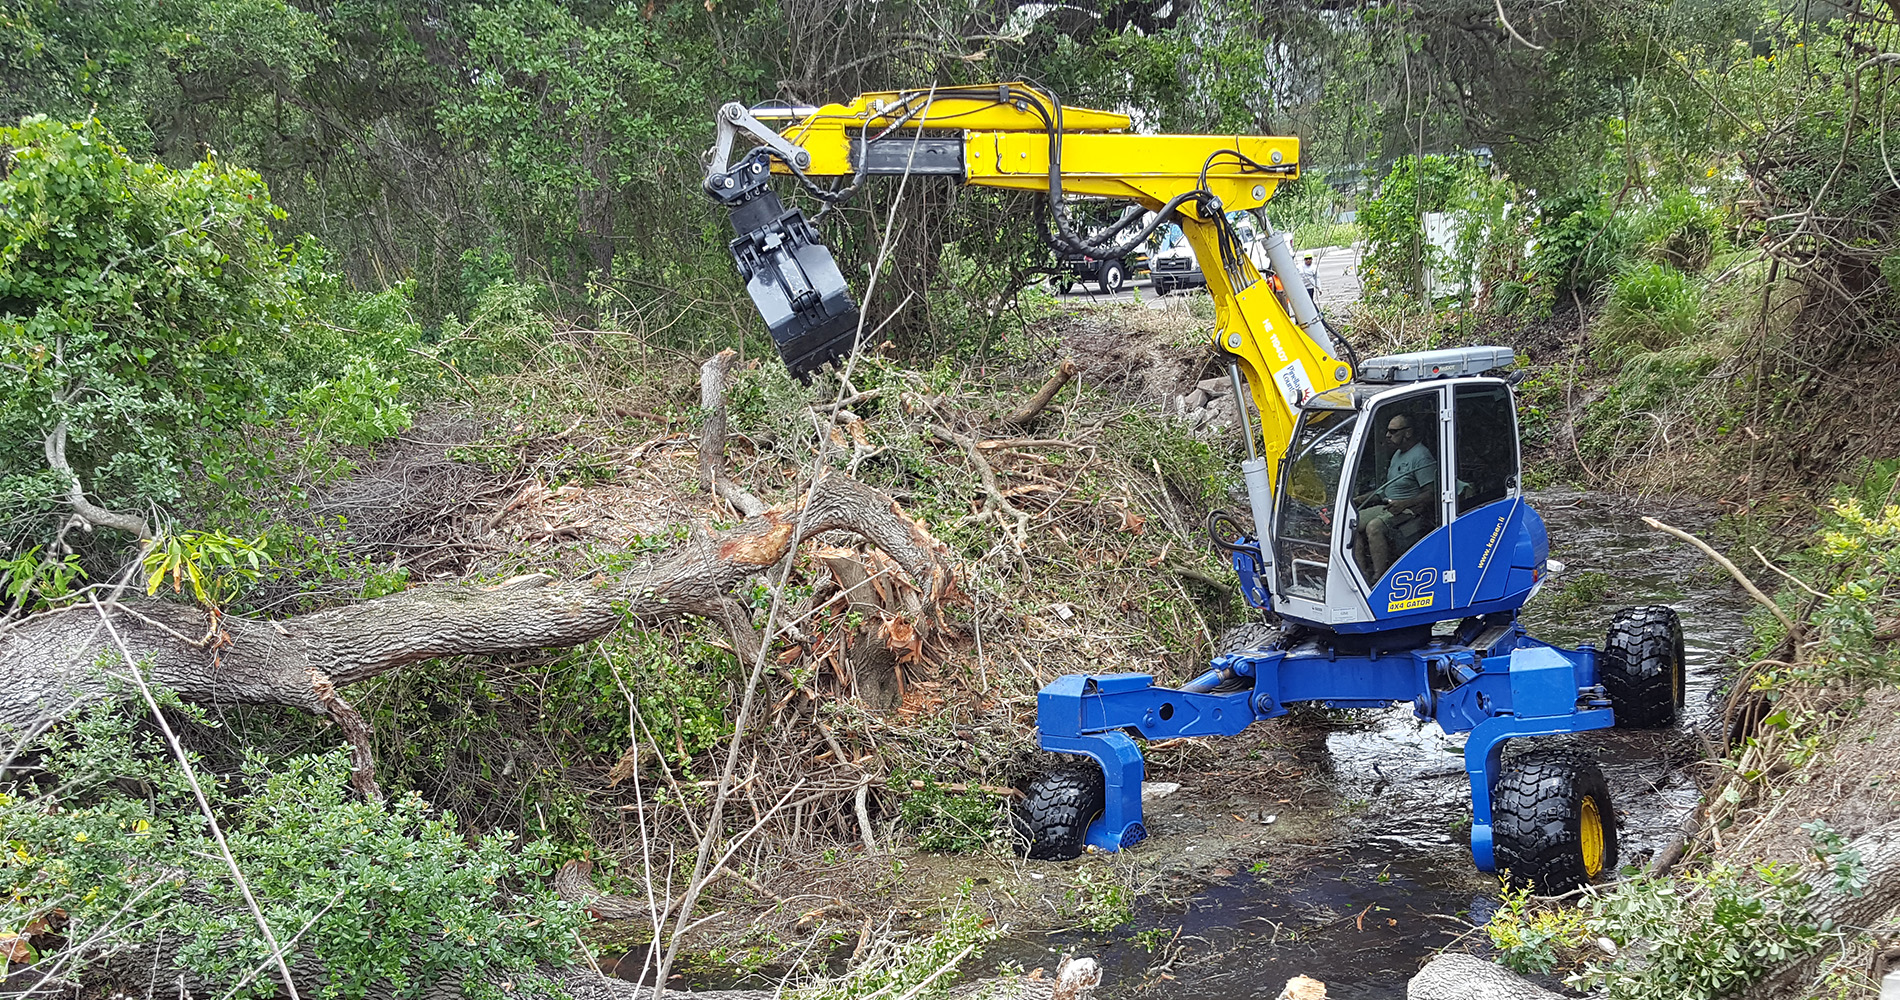 Spider excavator clearing tree debris from stormwater area